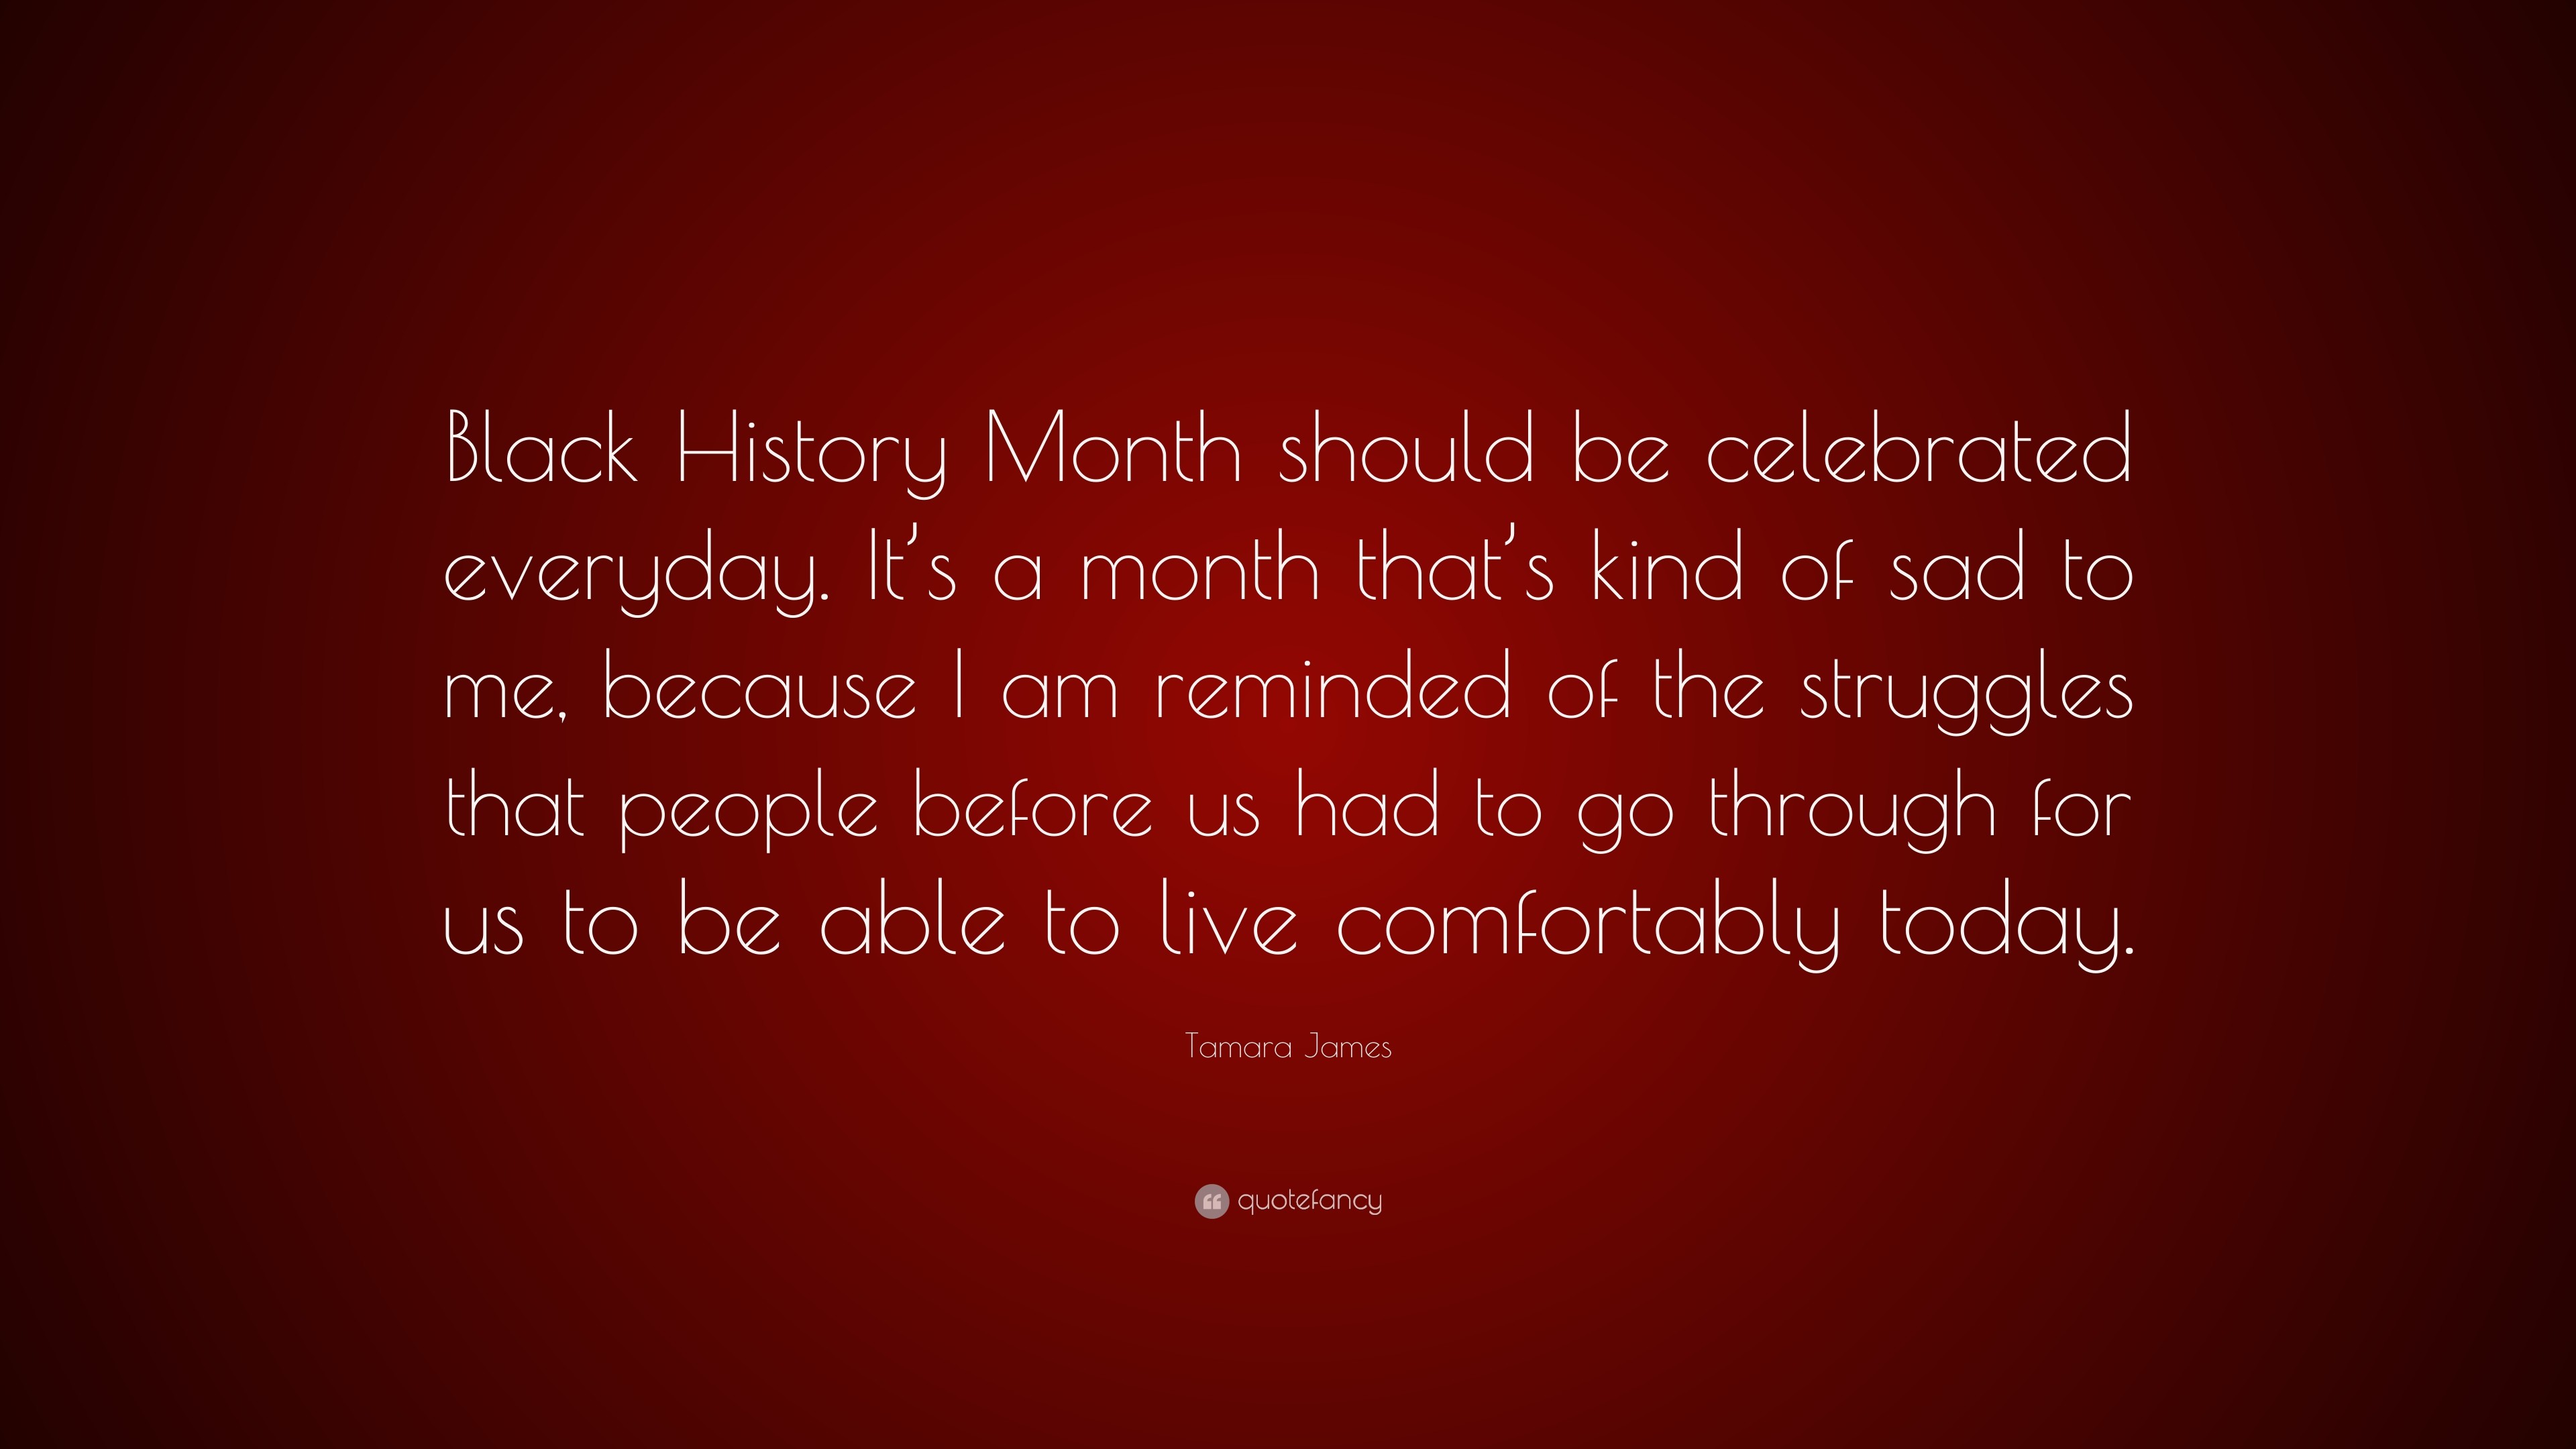 3840x2160 Tamara James Quote: “Black History Month should be celebrated everyday.  It's a month